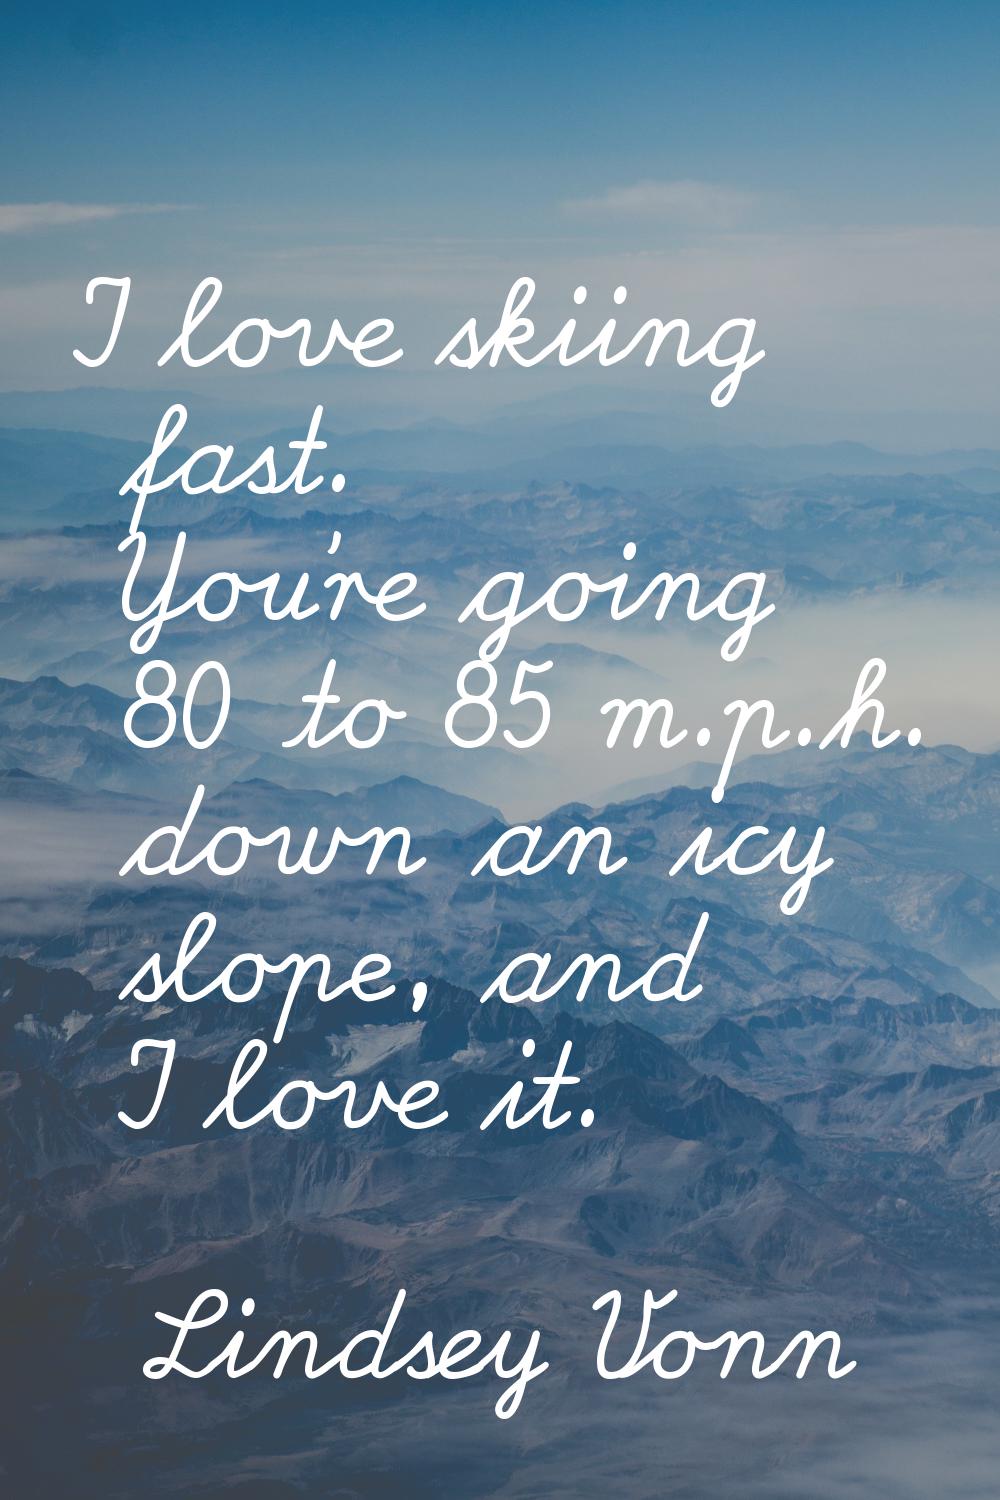 I love skiing fast. You're going 80 to 85 m.p.h. down an icy slope, and I love it.